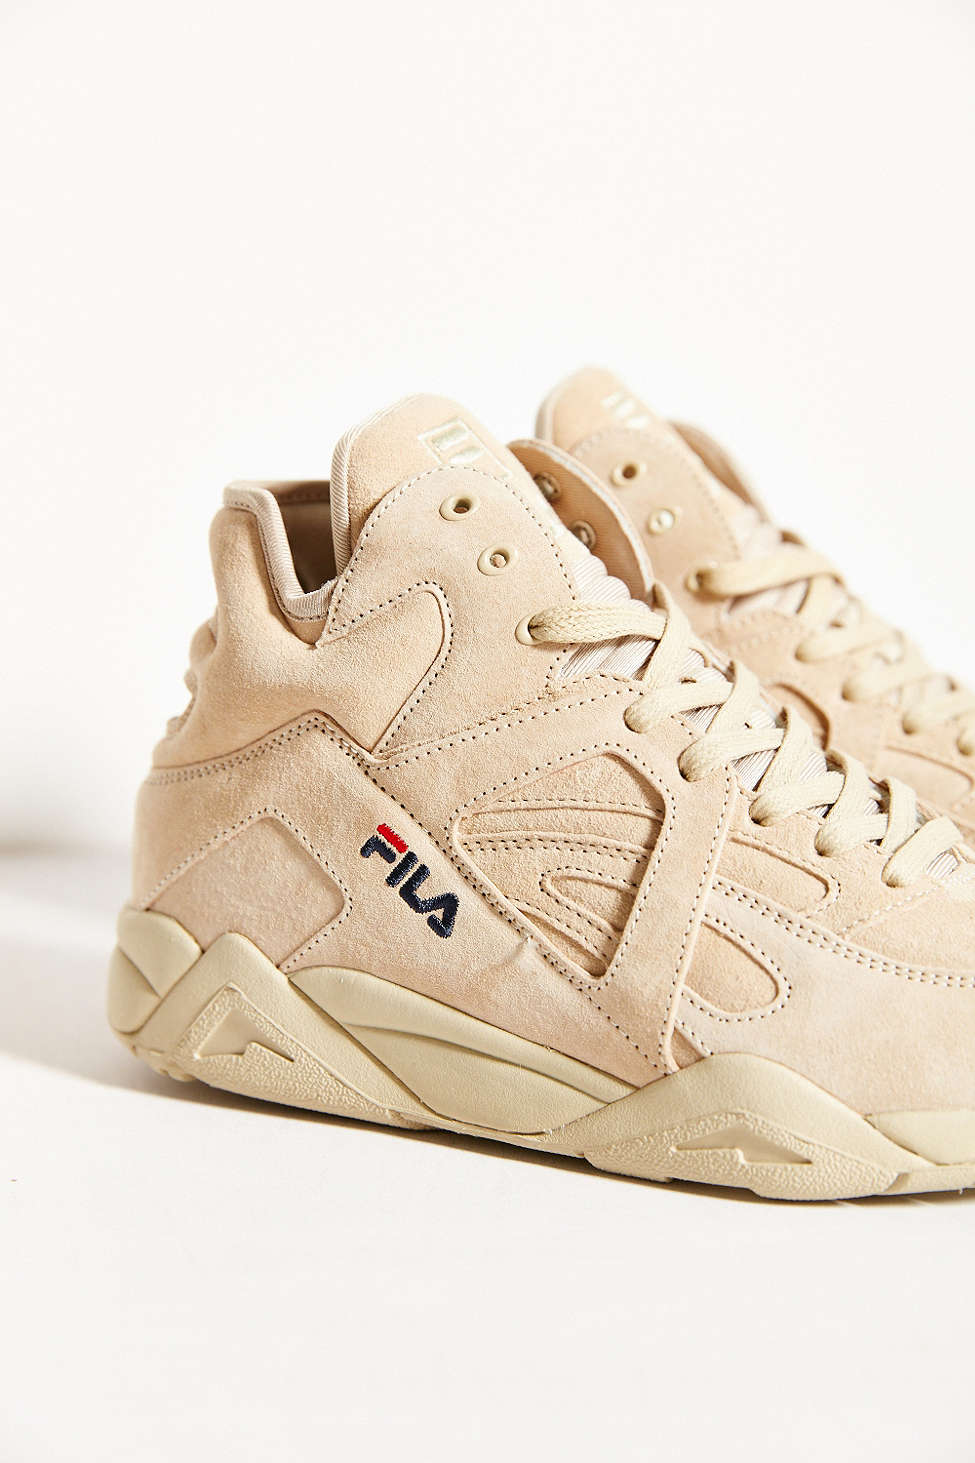 Urban Outfitters x FILA Cage 'Cream 